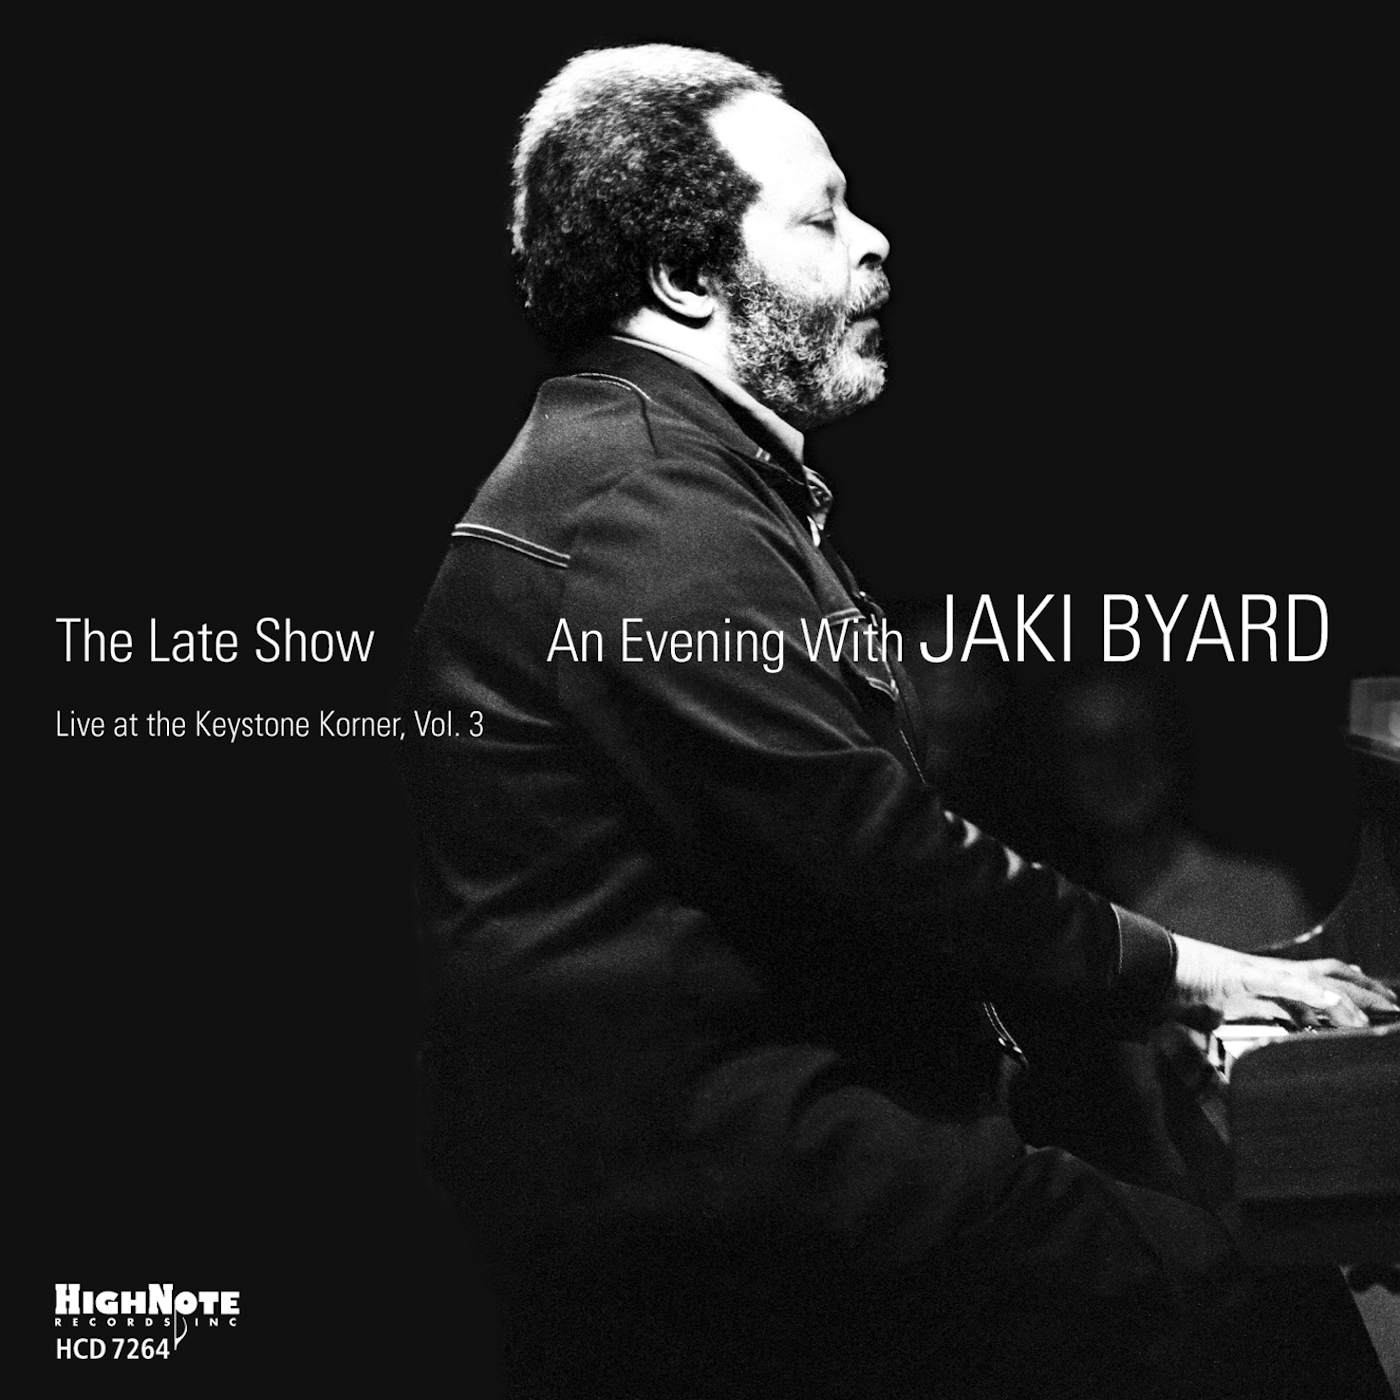 LATE SHOW: AN EVENING WITH JAKI BYARD CD